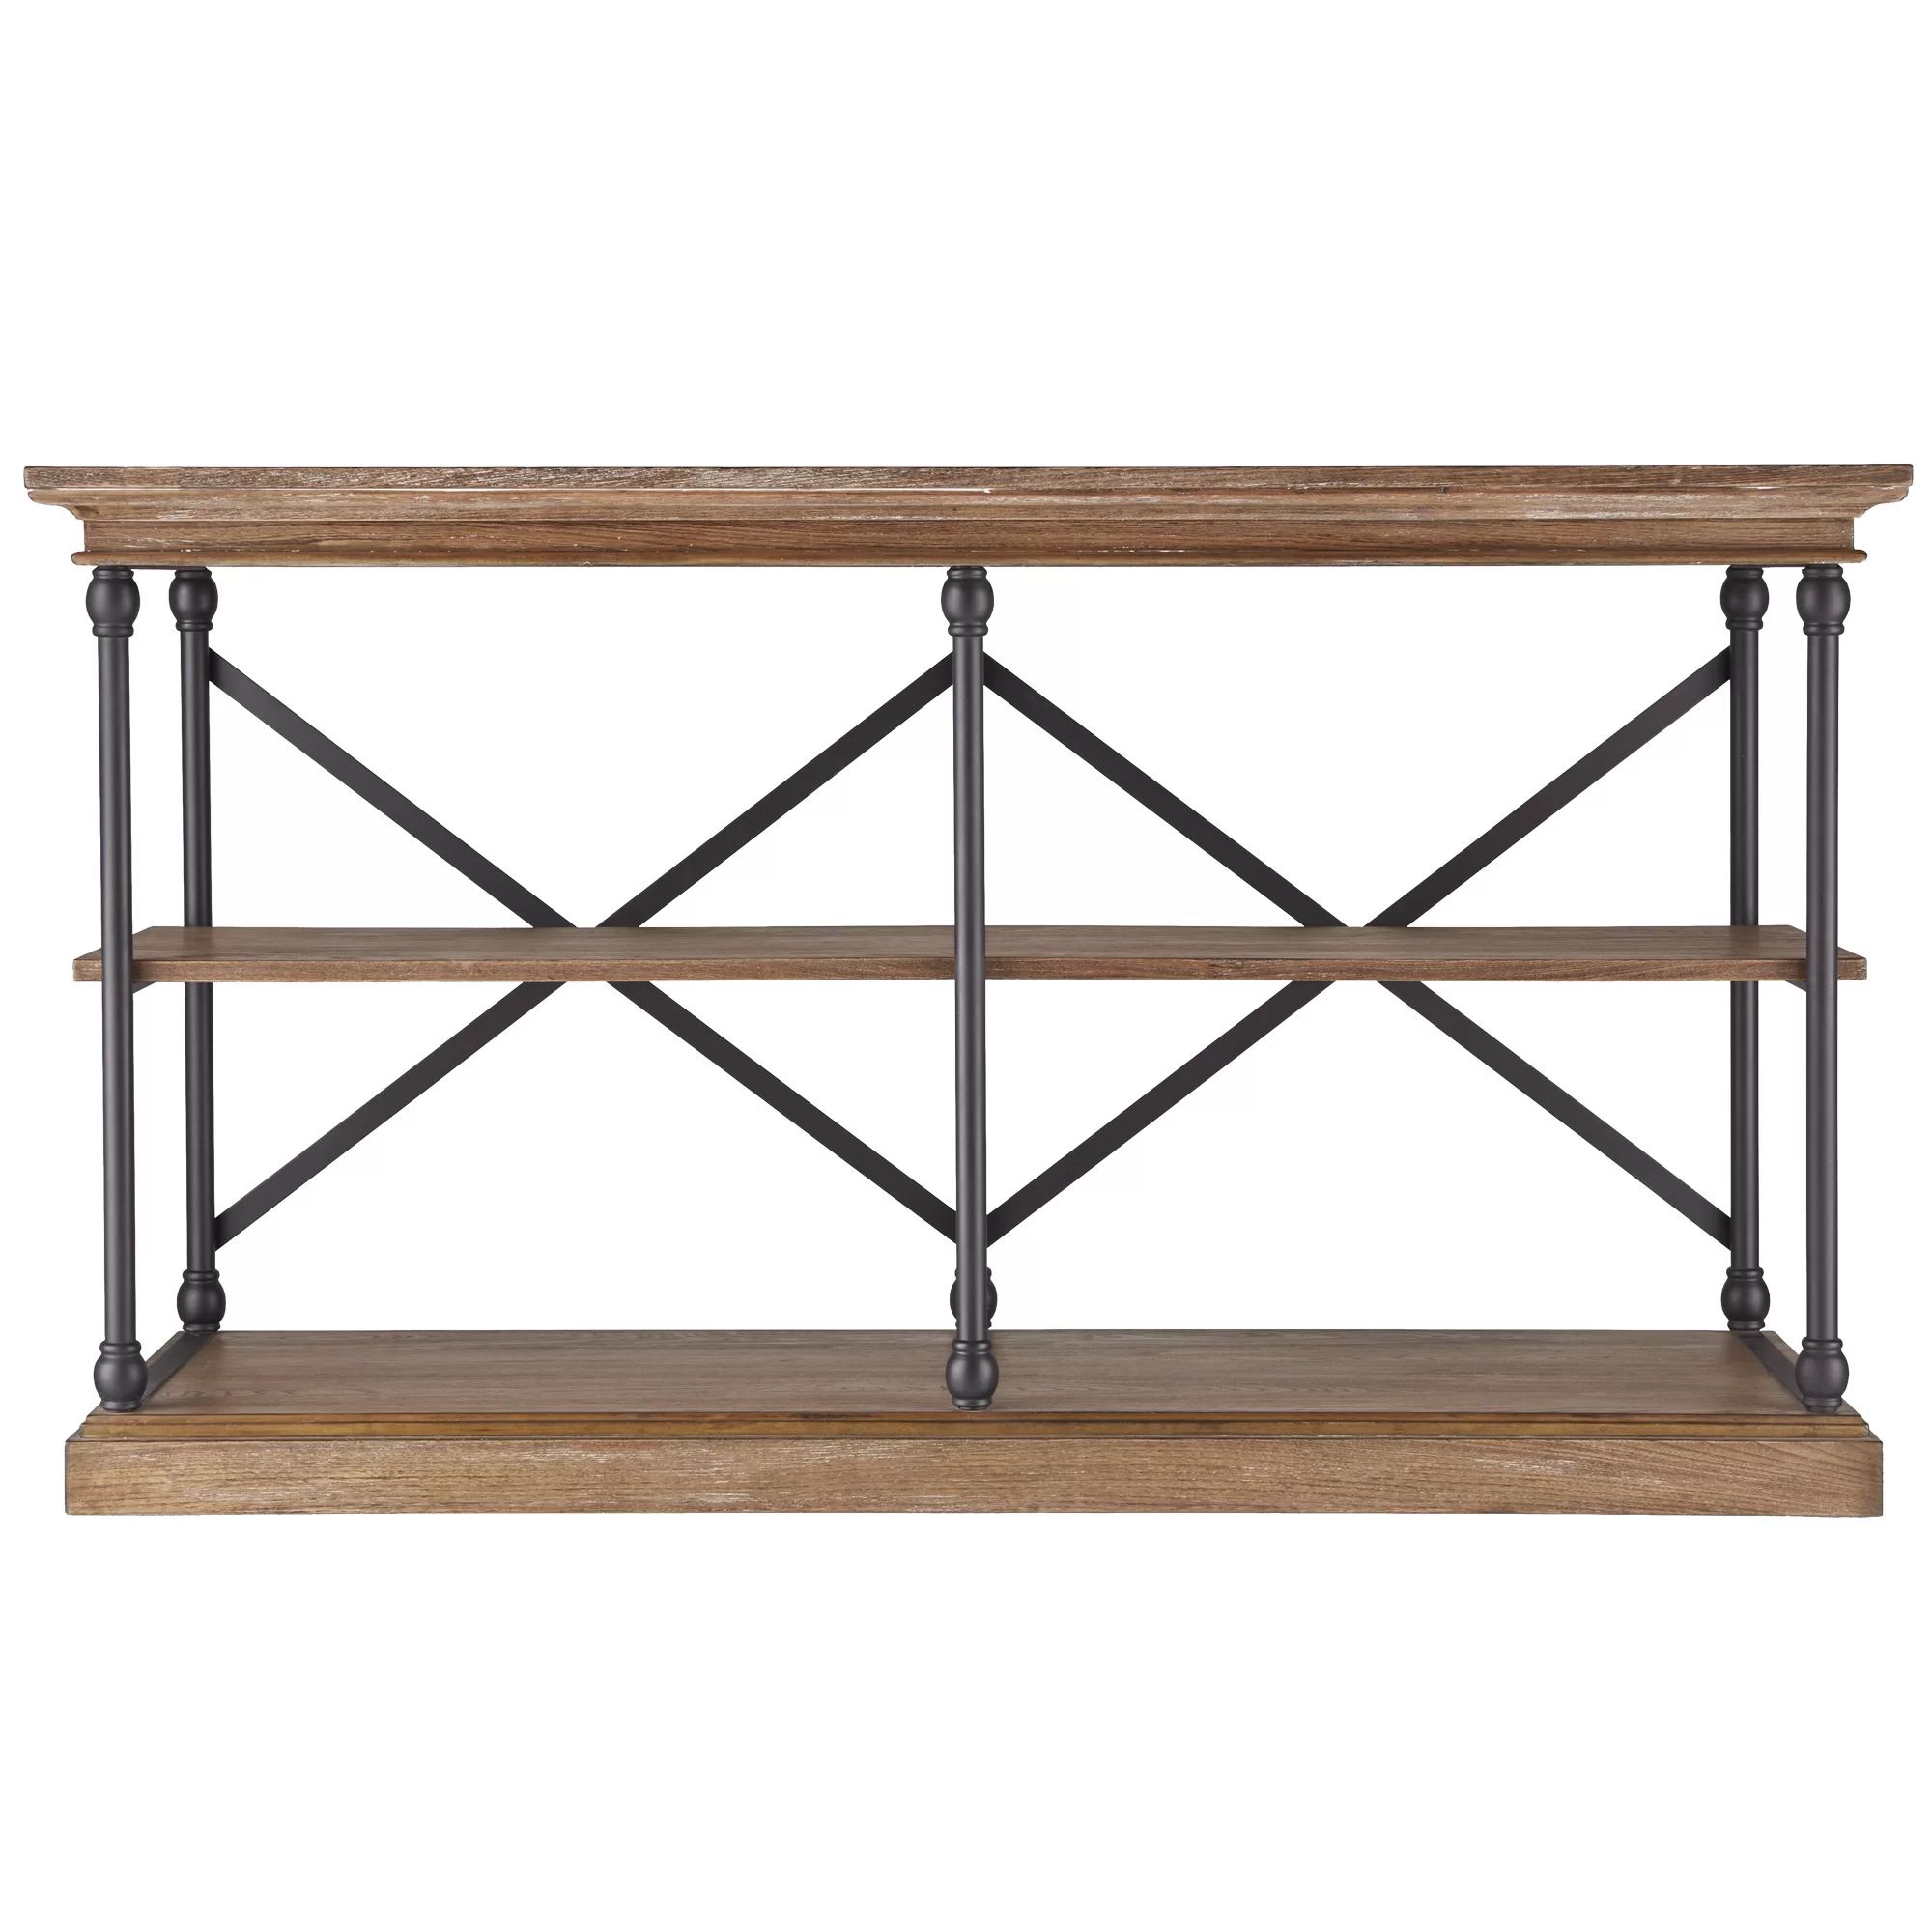 Kyler TV Stand for TVs up to 65" | Wayfair North America